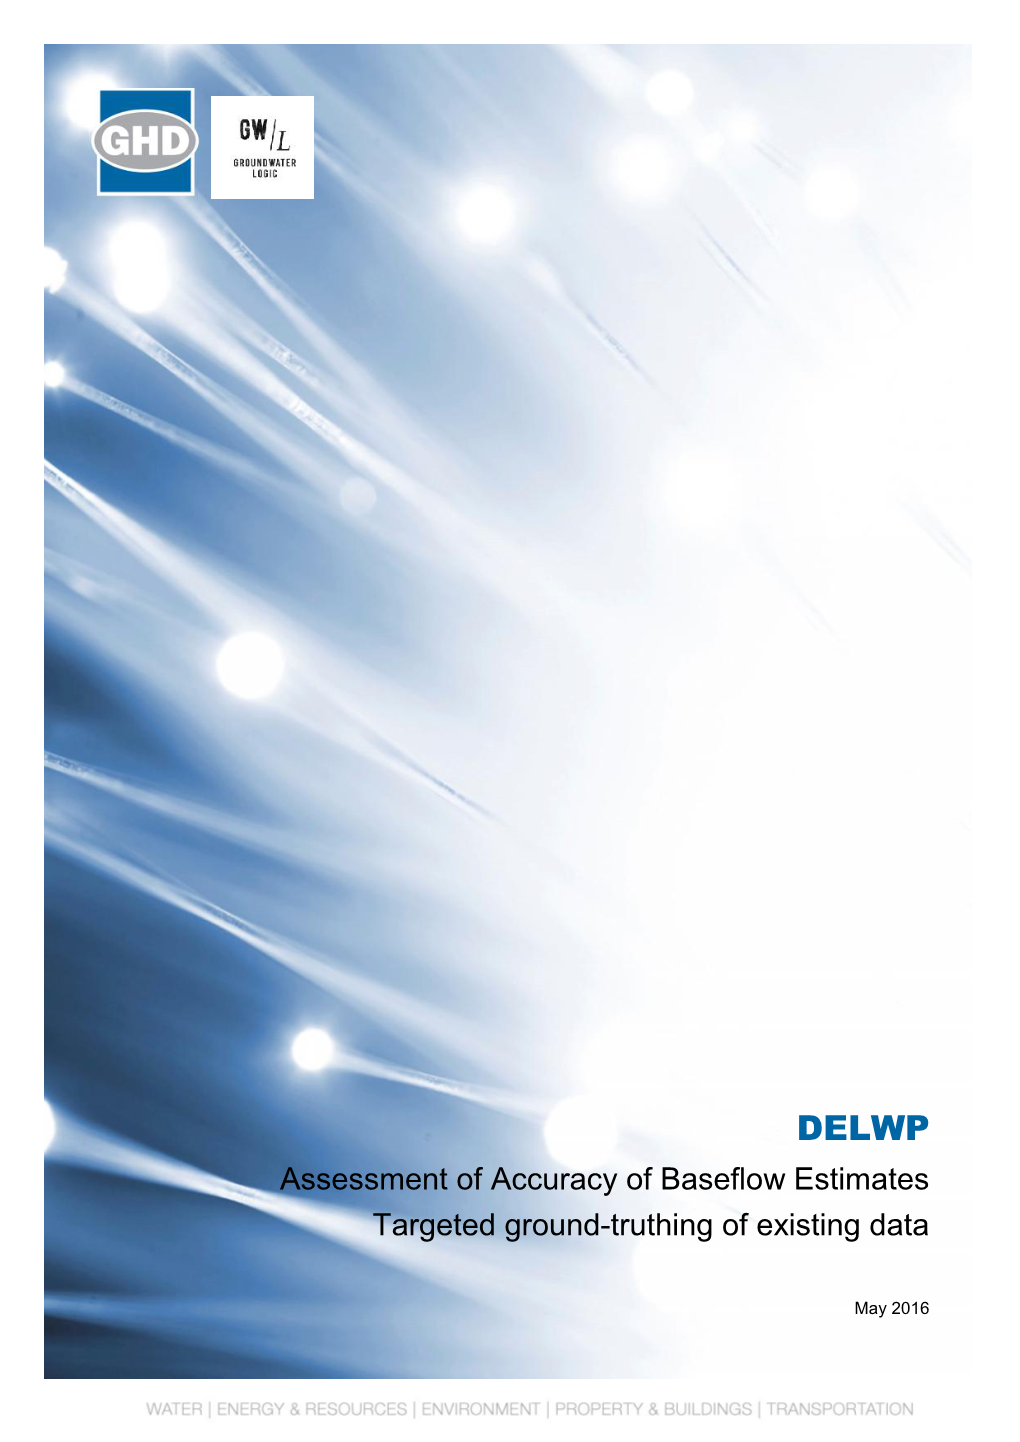 Assessment of Accuracy of Baseflow Estimates Targeted Ground-Truthing of Existing Data